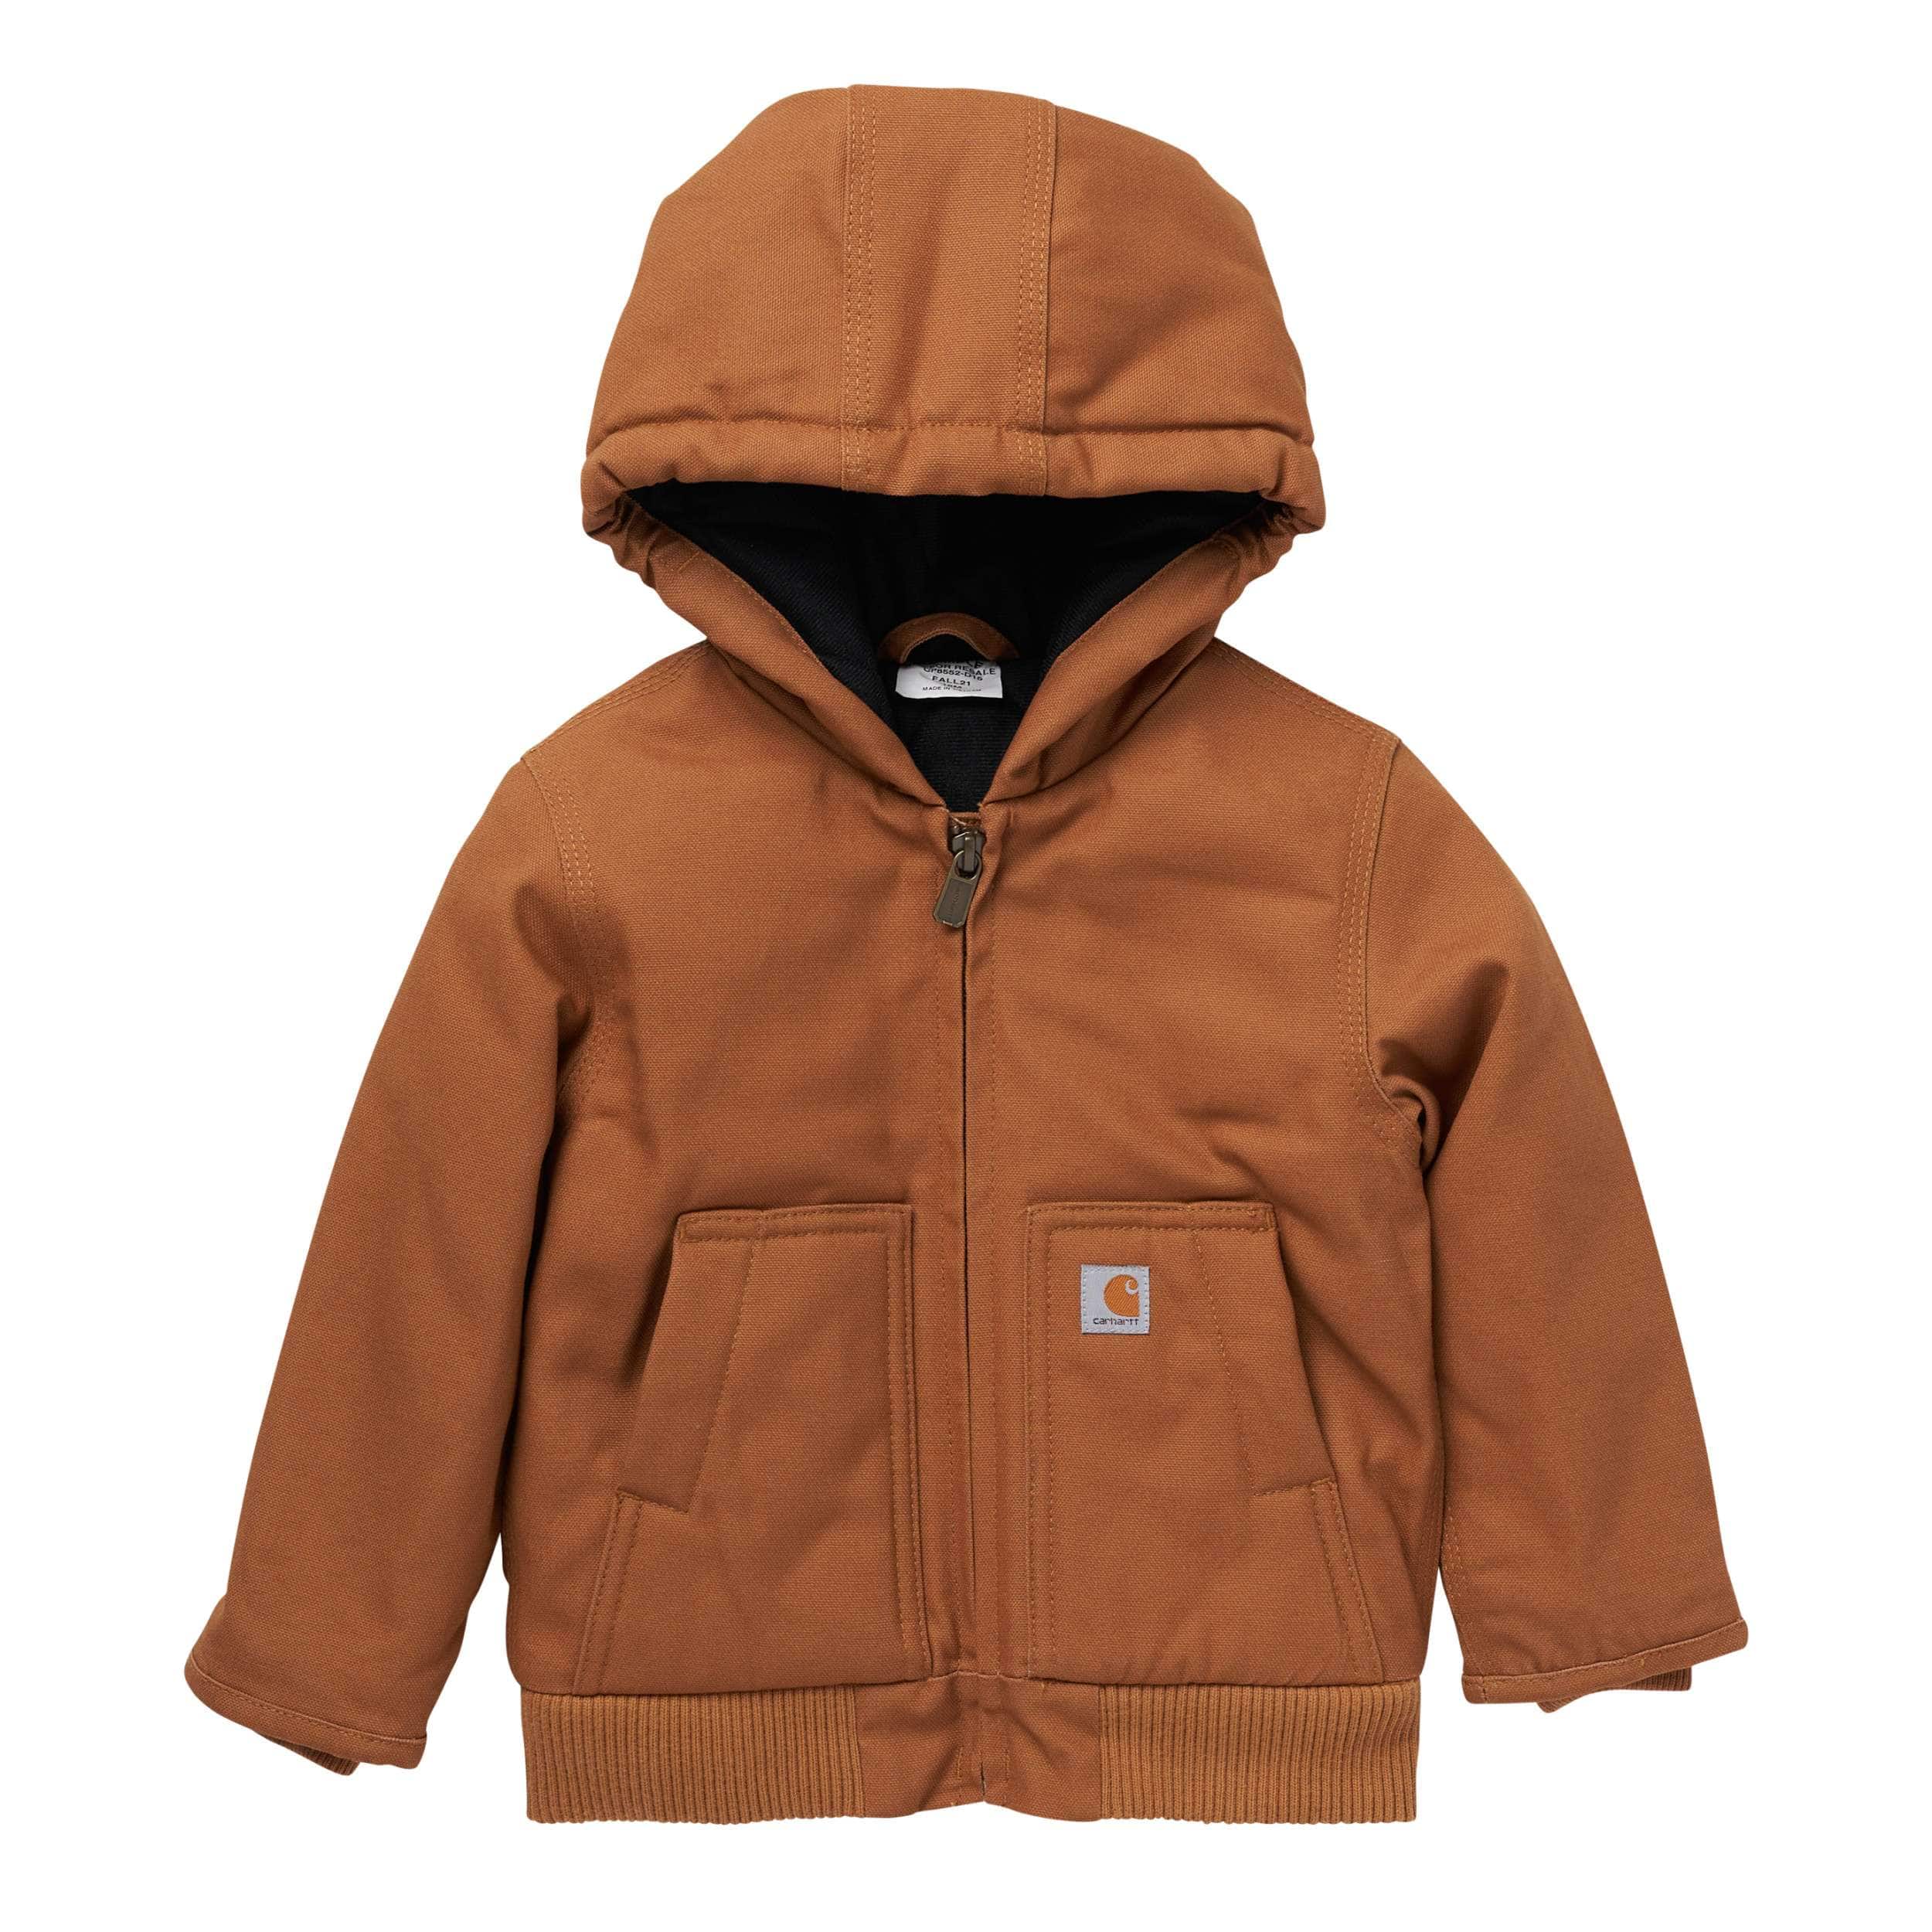 Boys' Hooded Insulated Active Jac (Infant/Toddler)